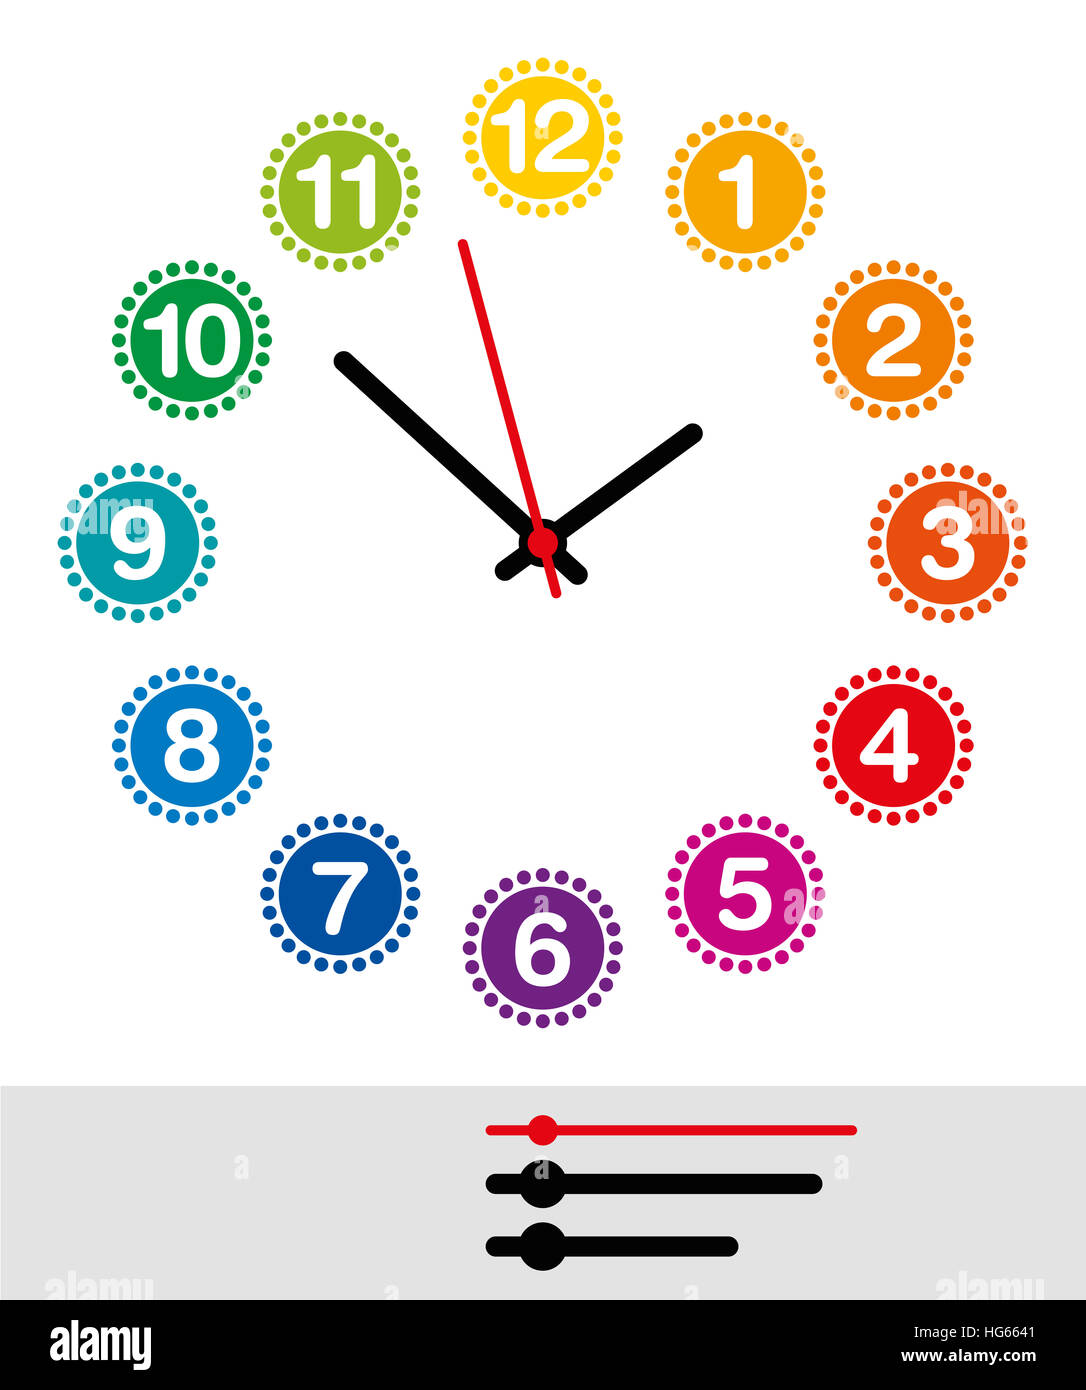 Rainbow colored clock face with numerals one to twelve. Analog clock and watch dial with black and red pointers. Stock Photo